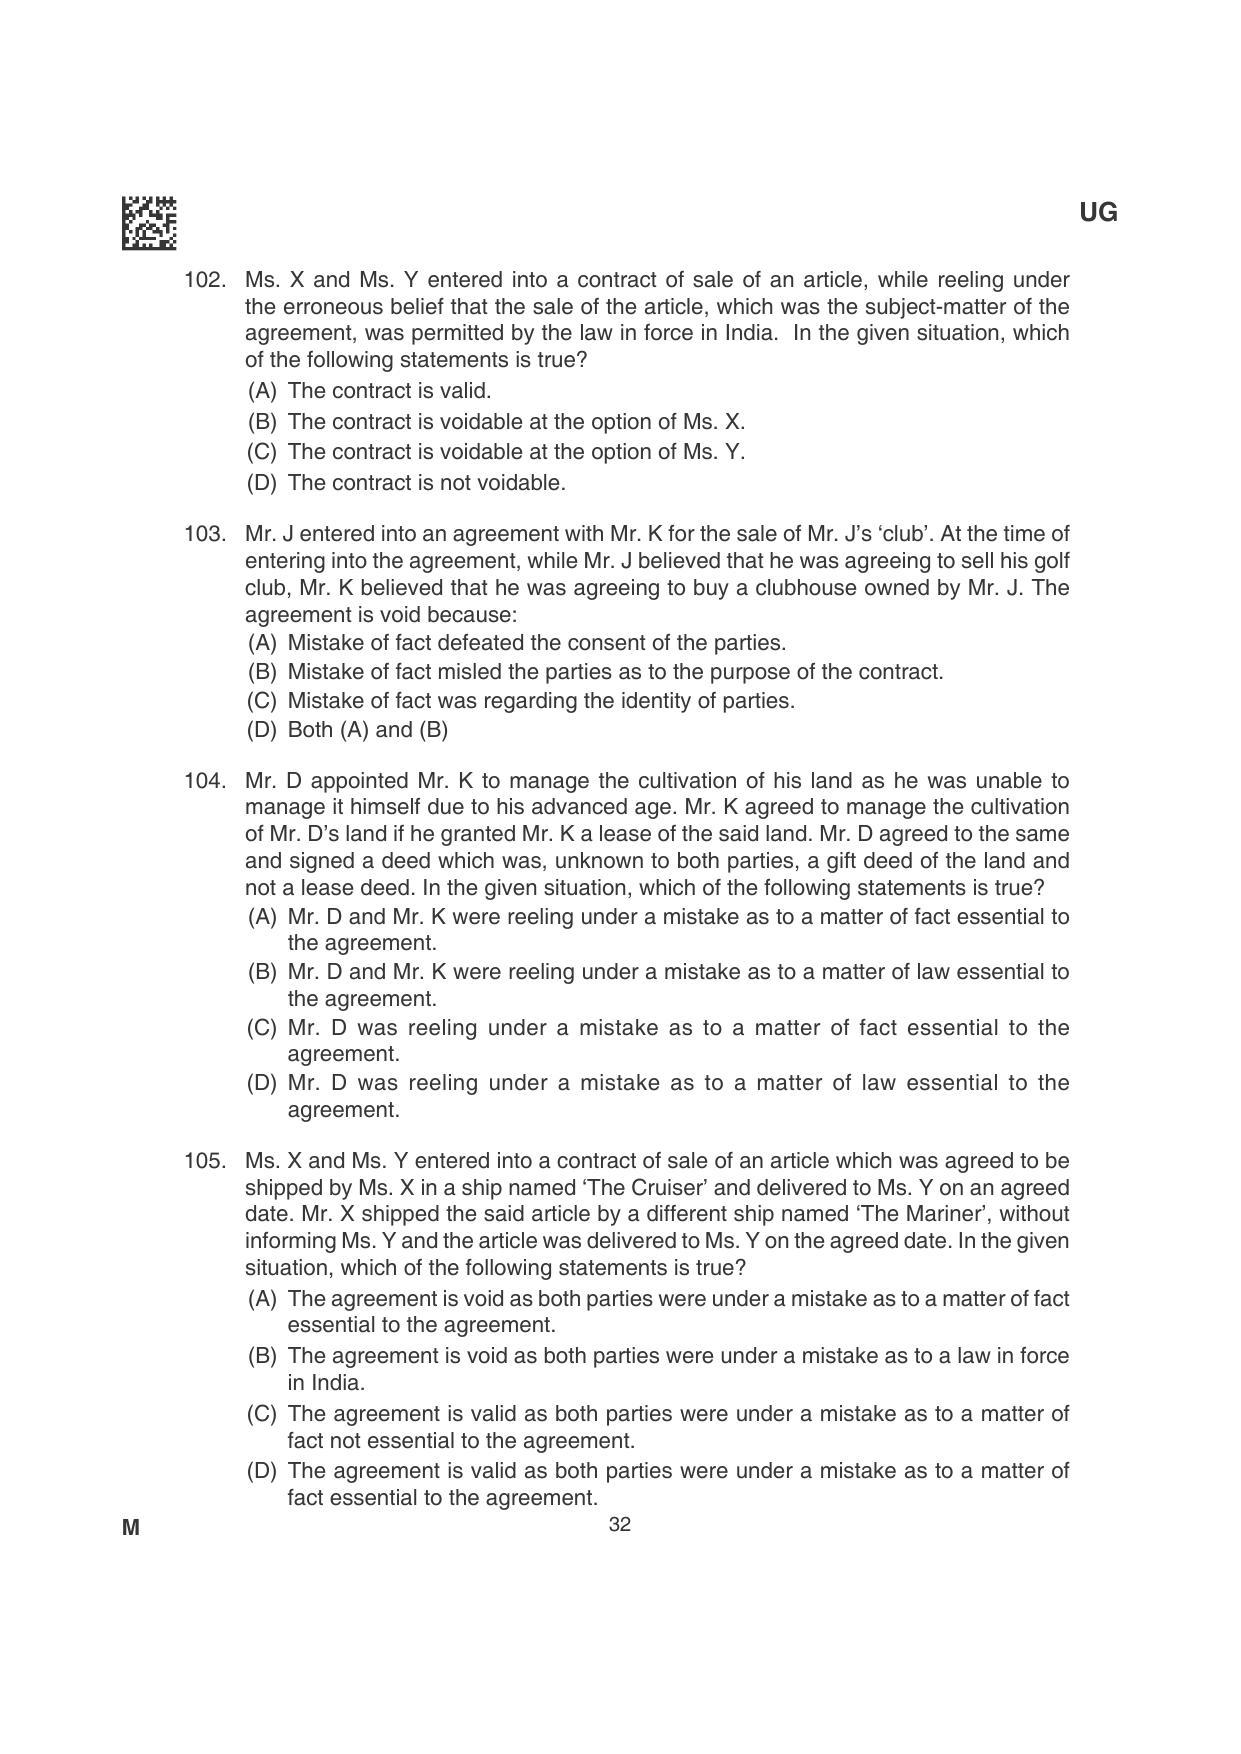 CLAT 2022 UG Question Papers - Page 32